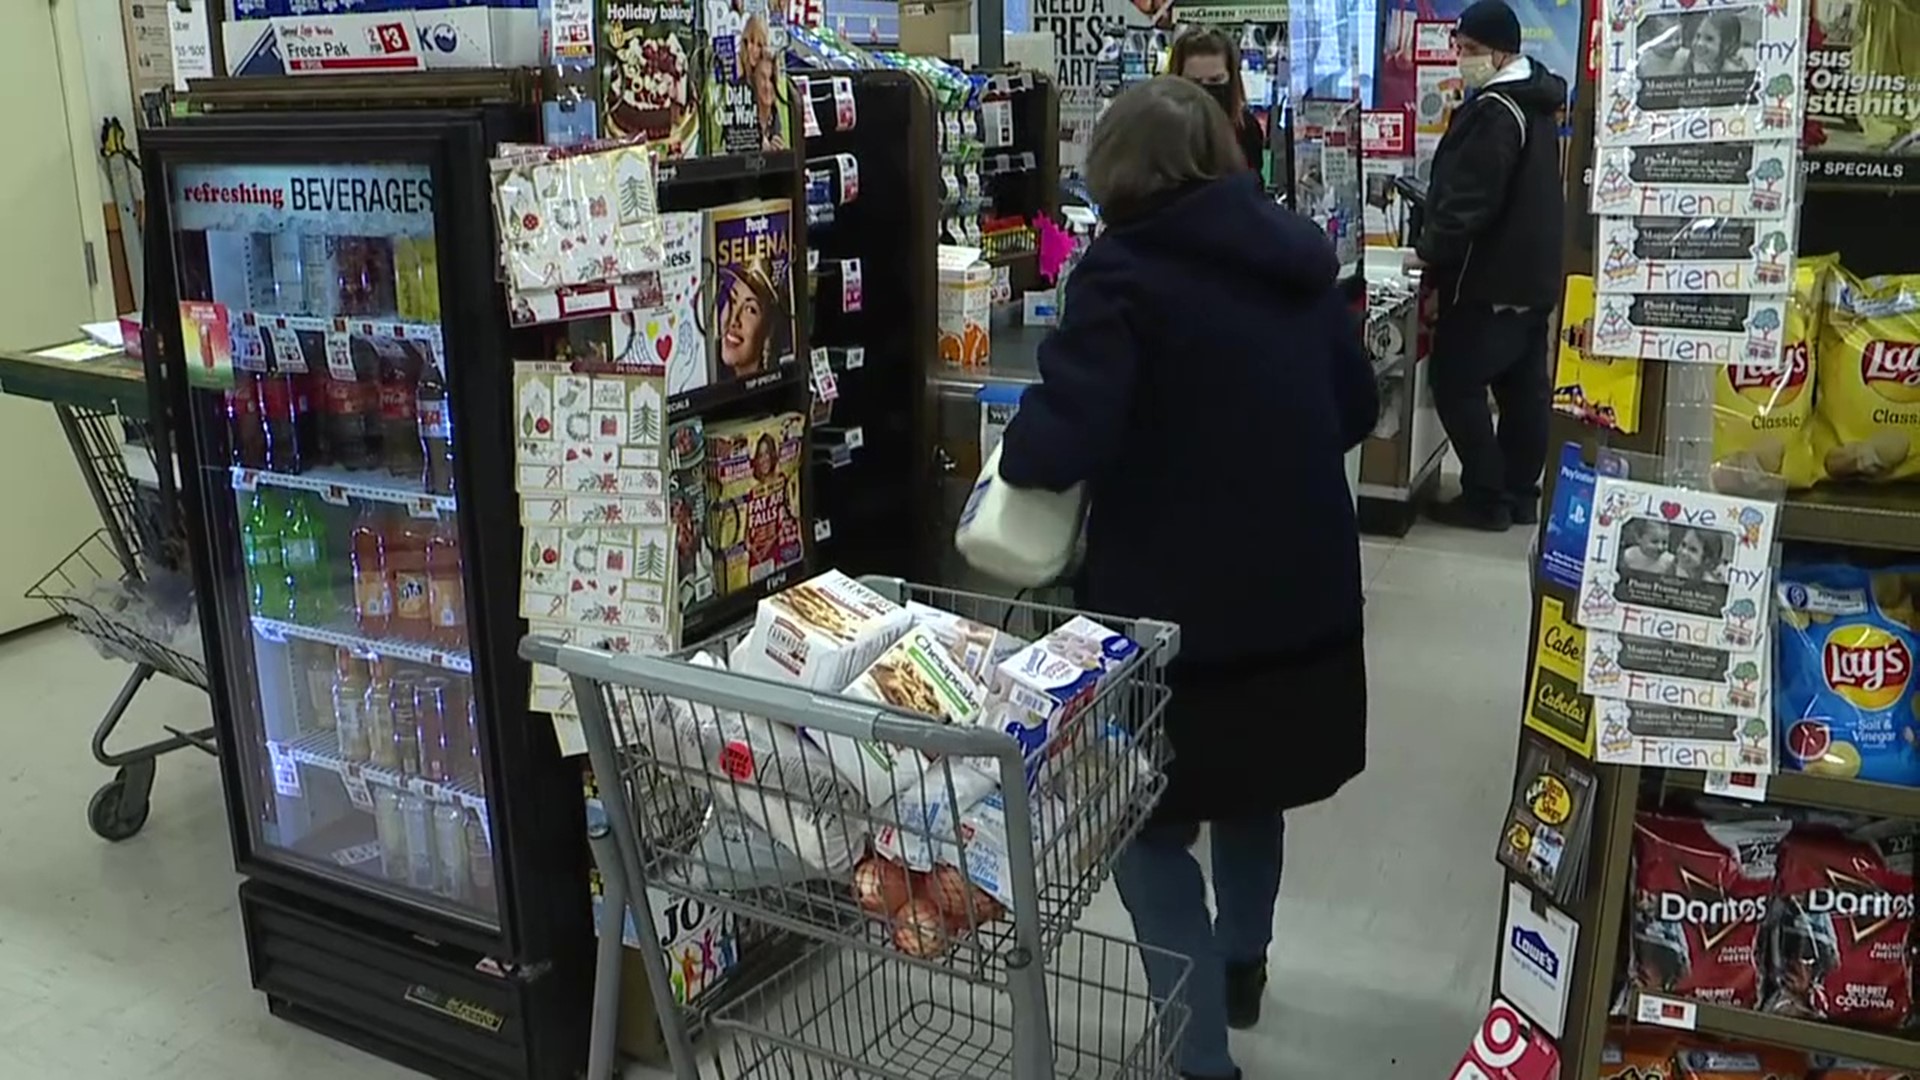 Some people trying to get some last-minute items were busy running errands Wednesday morning. And for many, that included a stop at the grocery store.